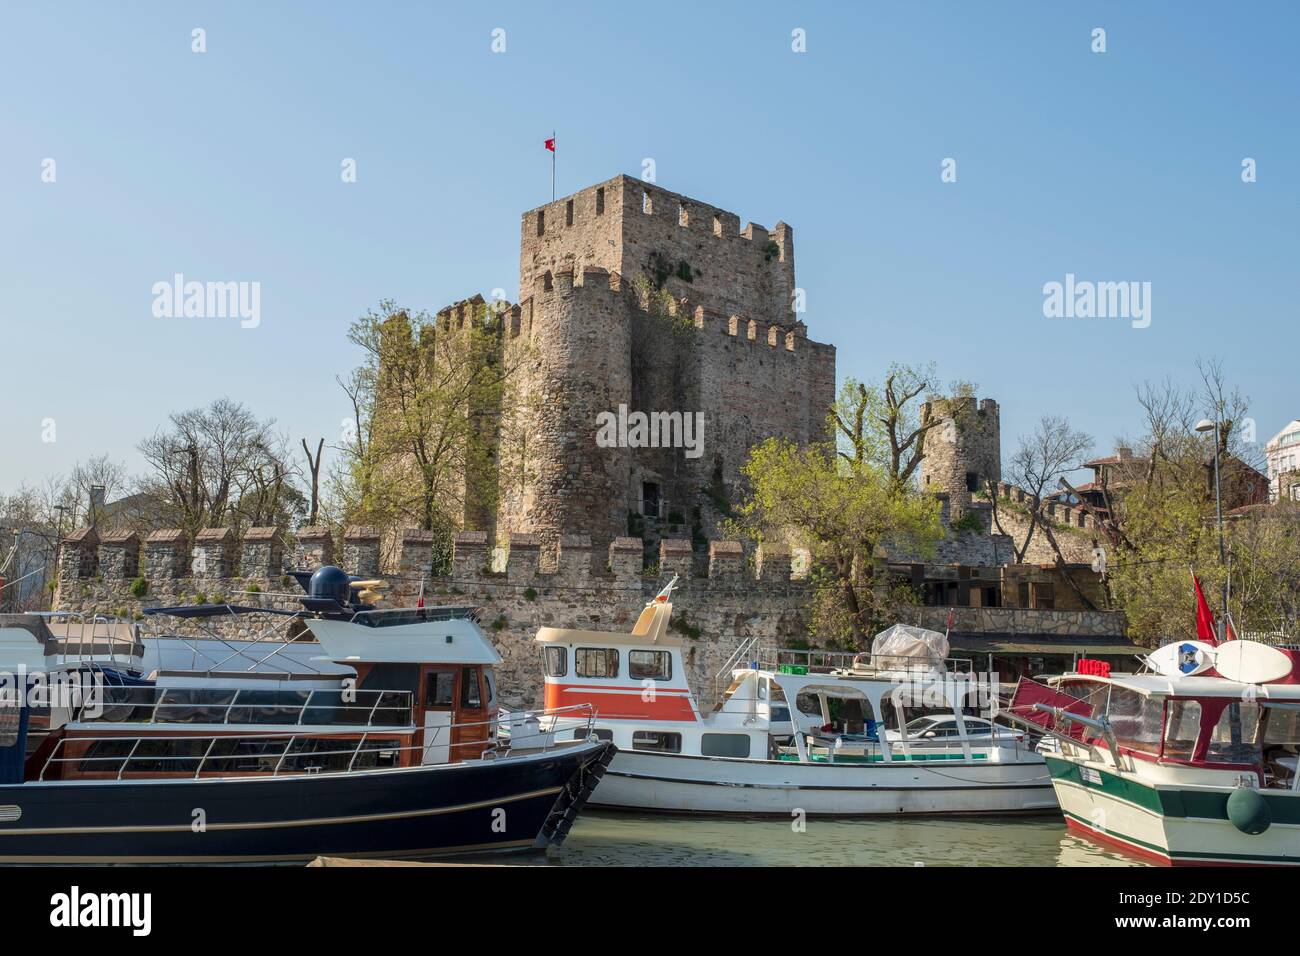 ISTANBUL, TURKEY - APRIL 10, 2018:Anatolian castle (Anadolu Hisari) in Istanbul.It is a fortress located in Anatolian (Asian) side of the Bosporus Stock Photo